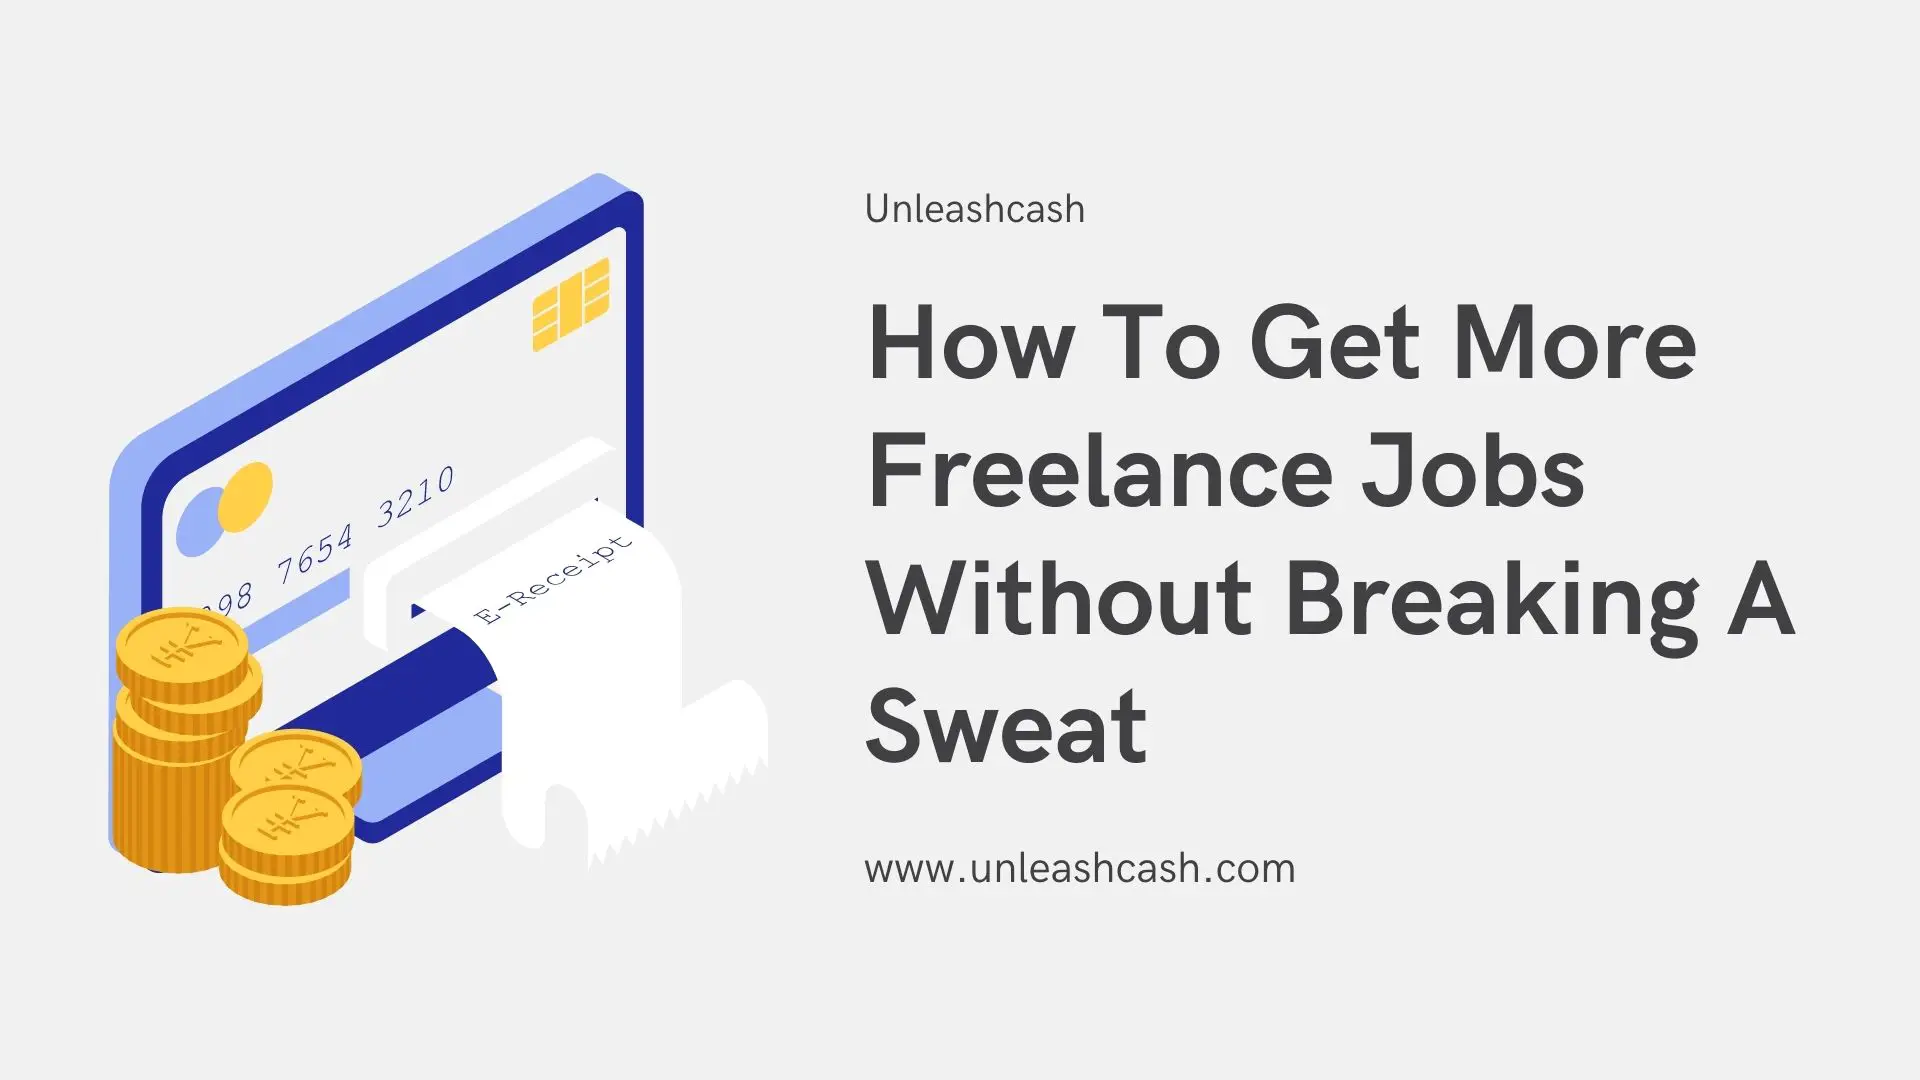 How To Get More Freelance Jobs Without Breaking A Sweat